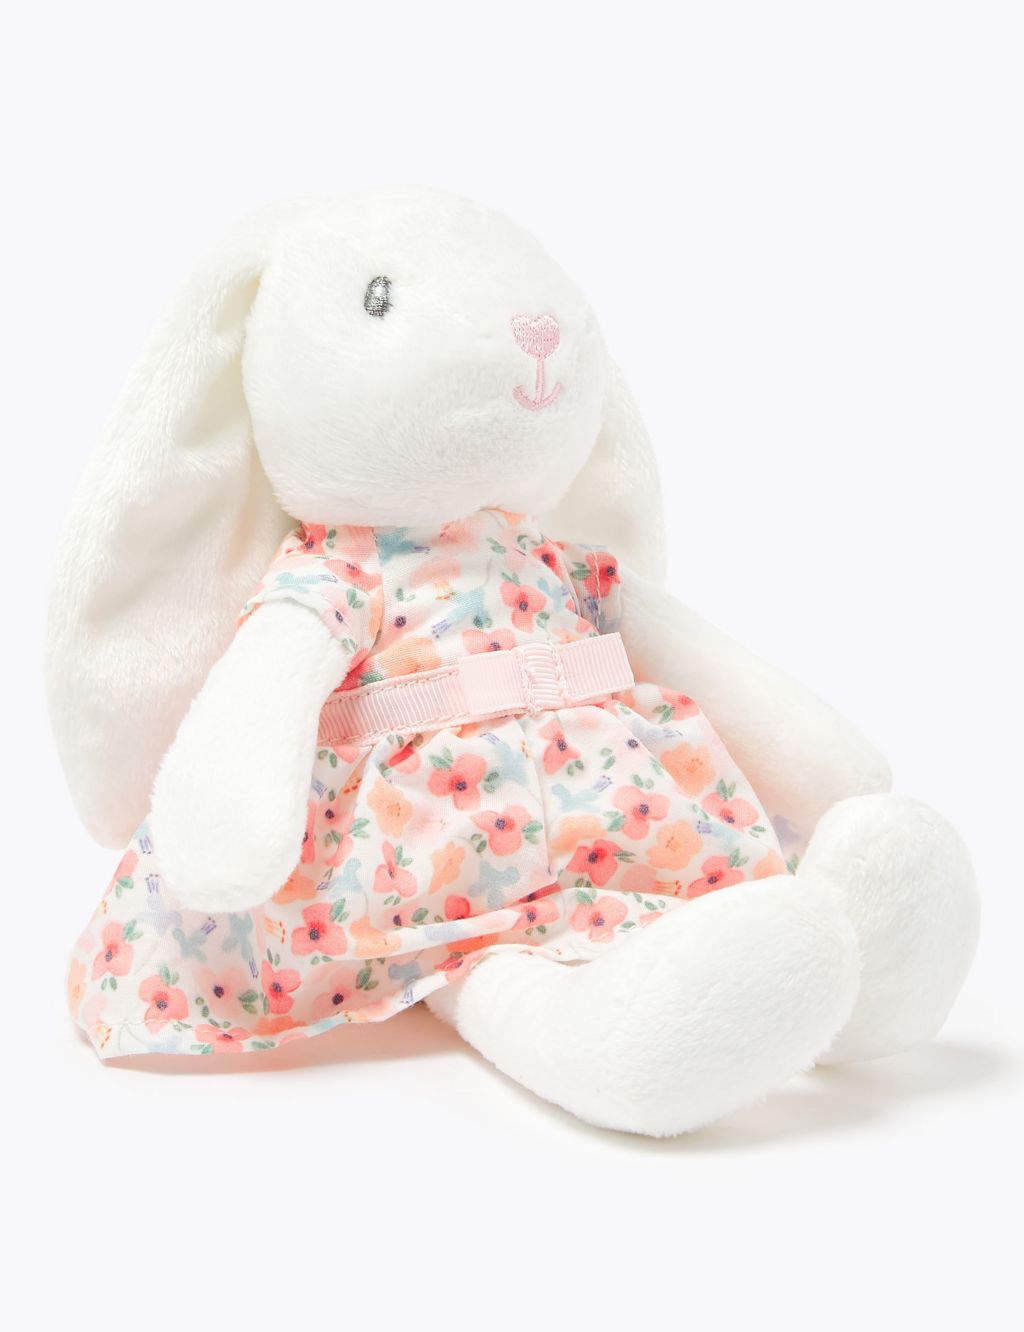 Bunny in a Dress Soft Toy image 2